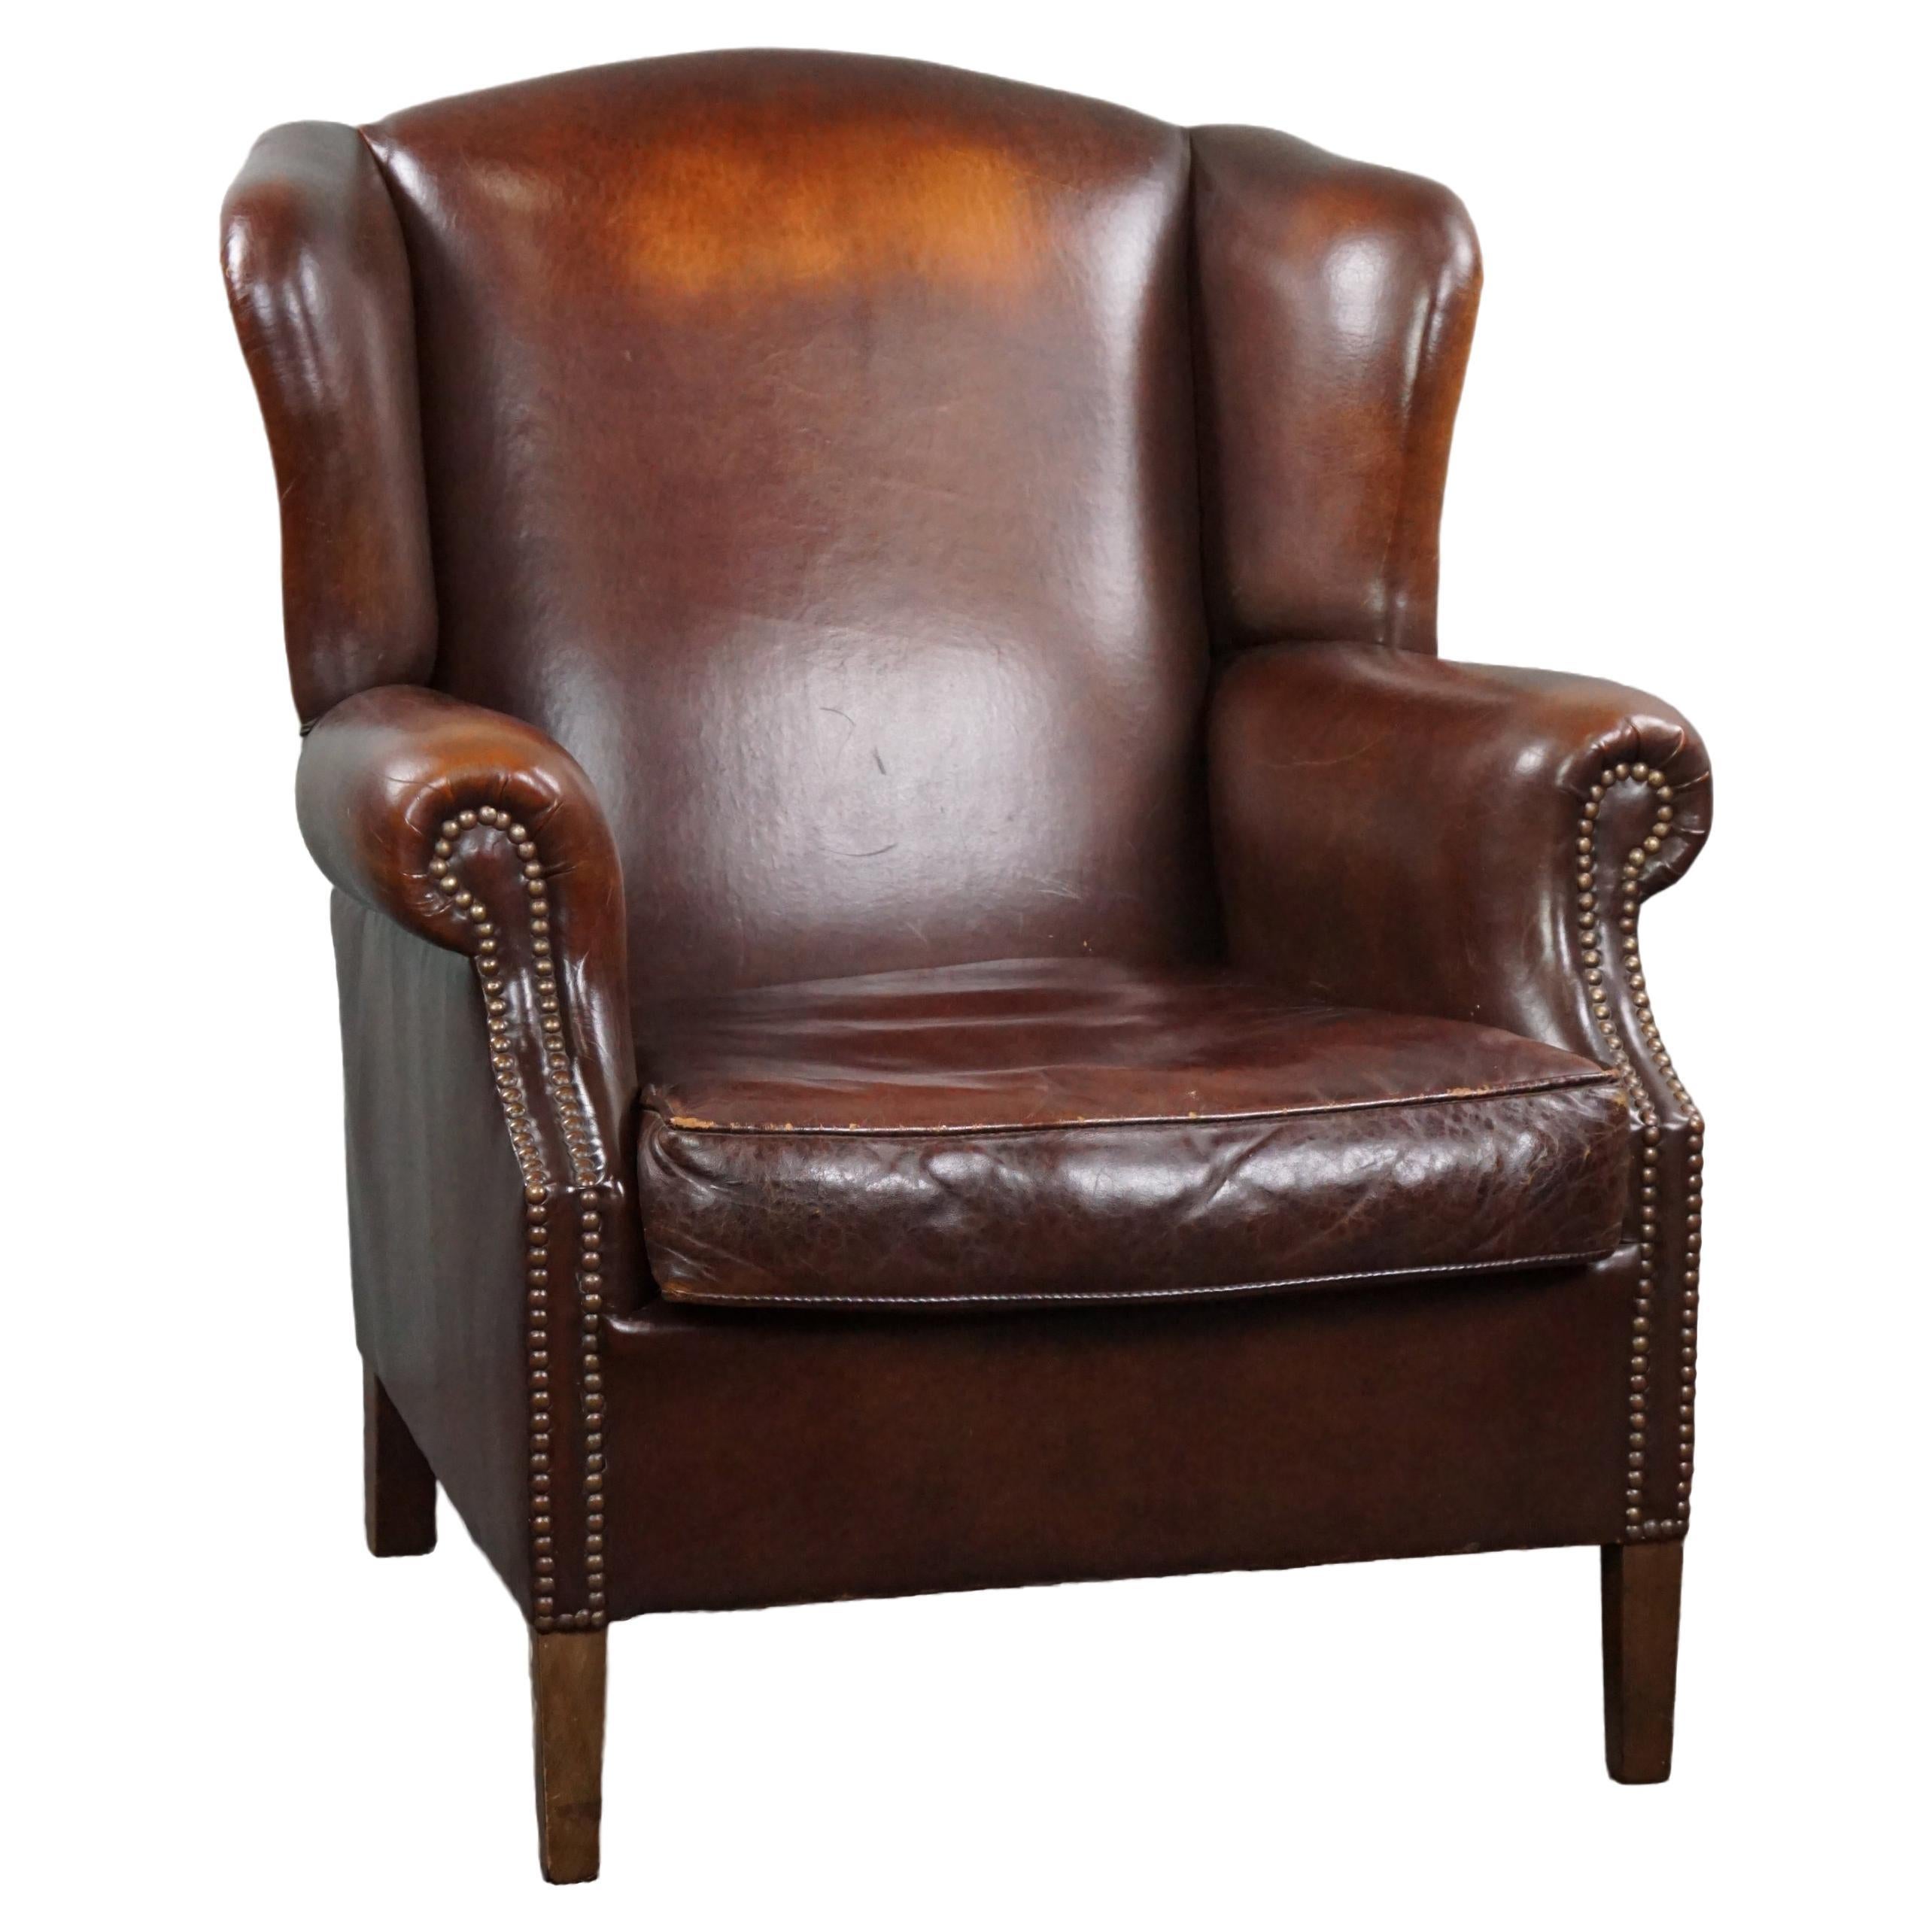 Beautiful warm-colored sheep leather wing chair For Sale